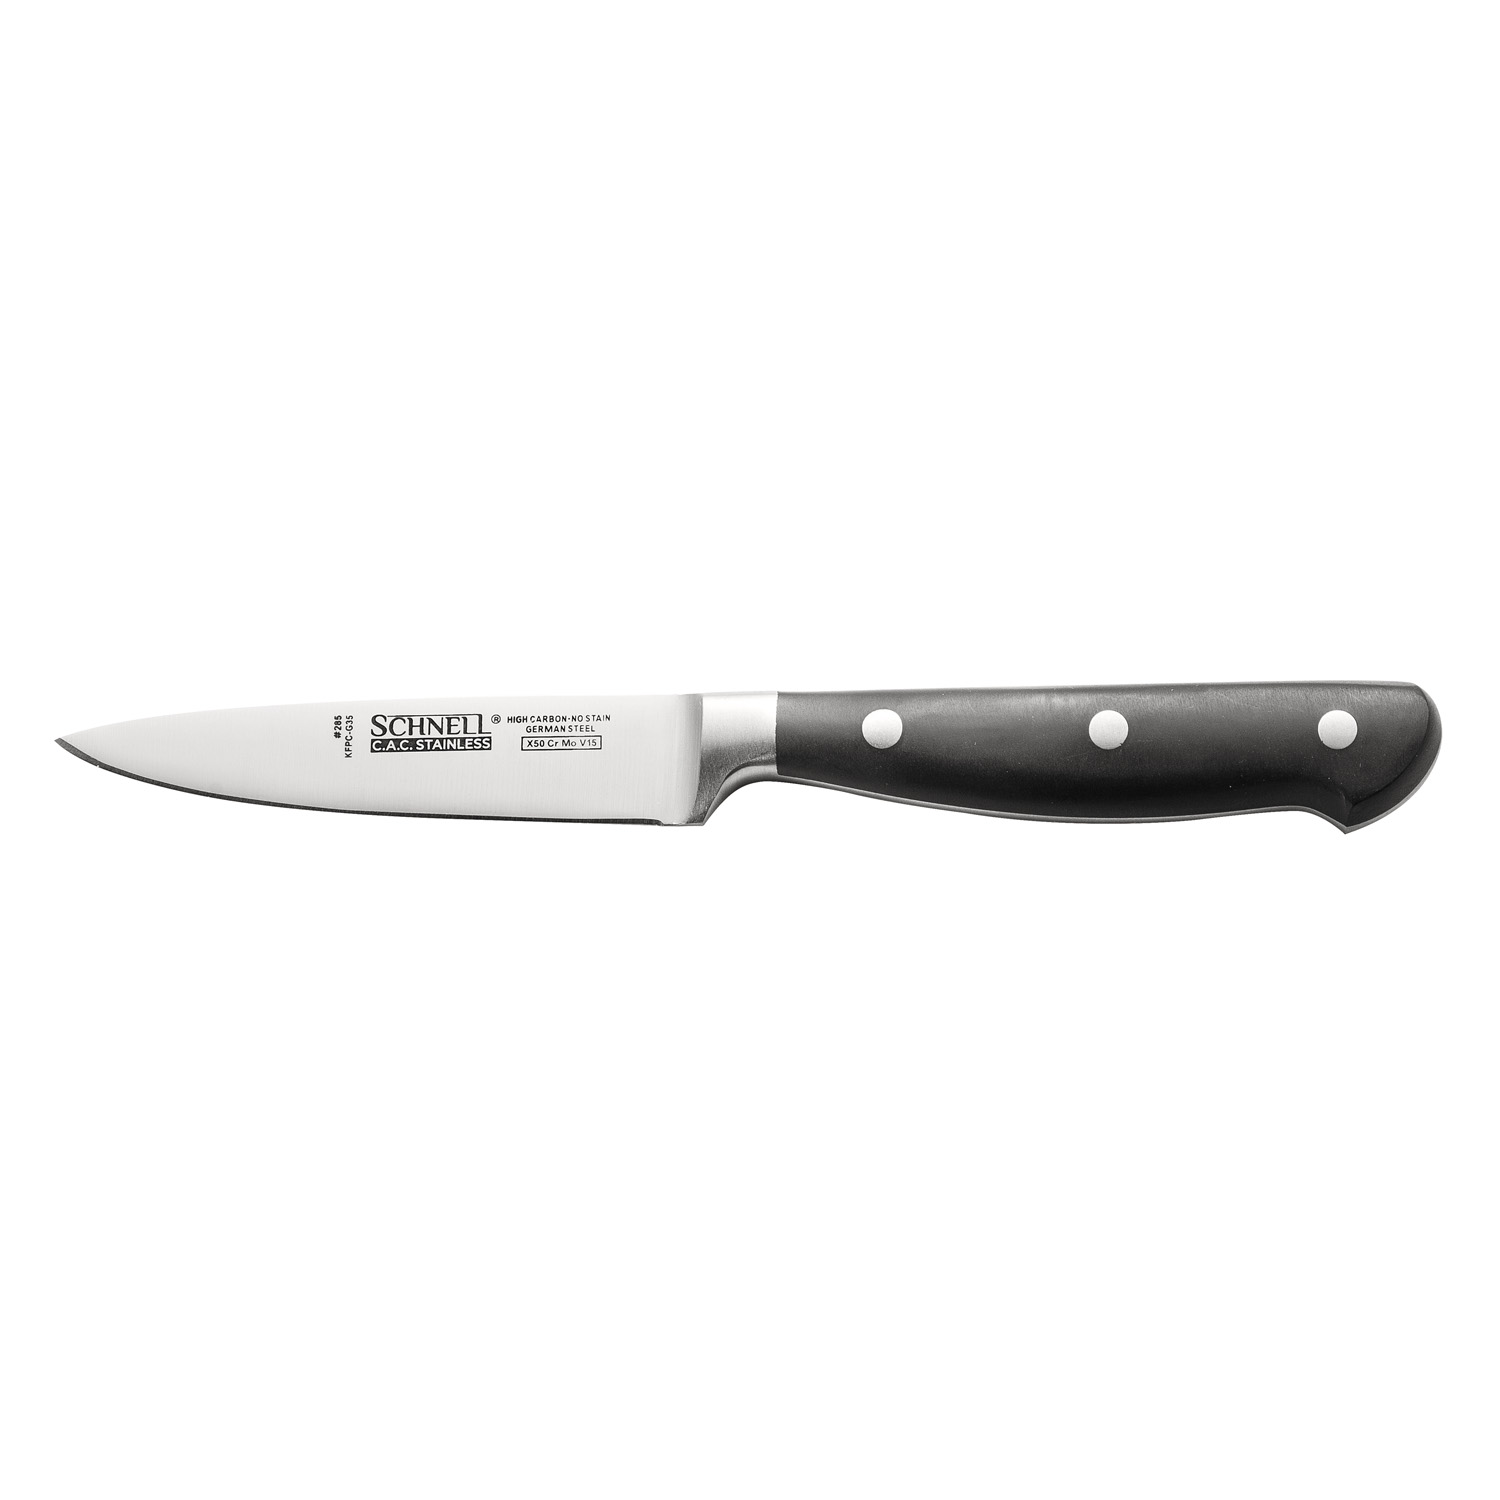 CAC China KFPC-G35 Schnell Paring Knife 3-1/2"